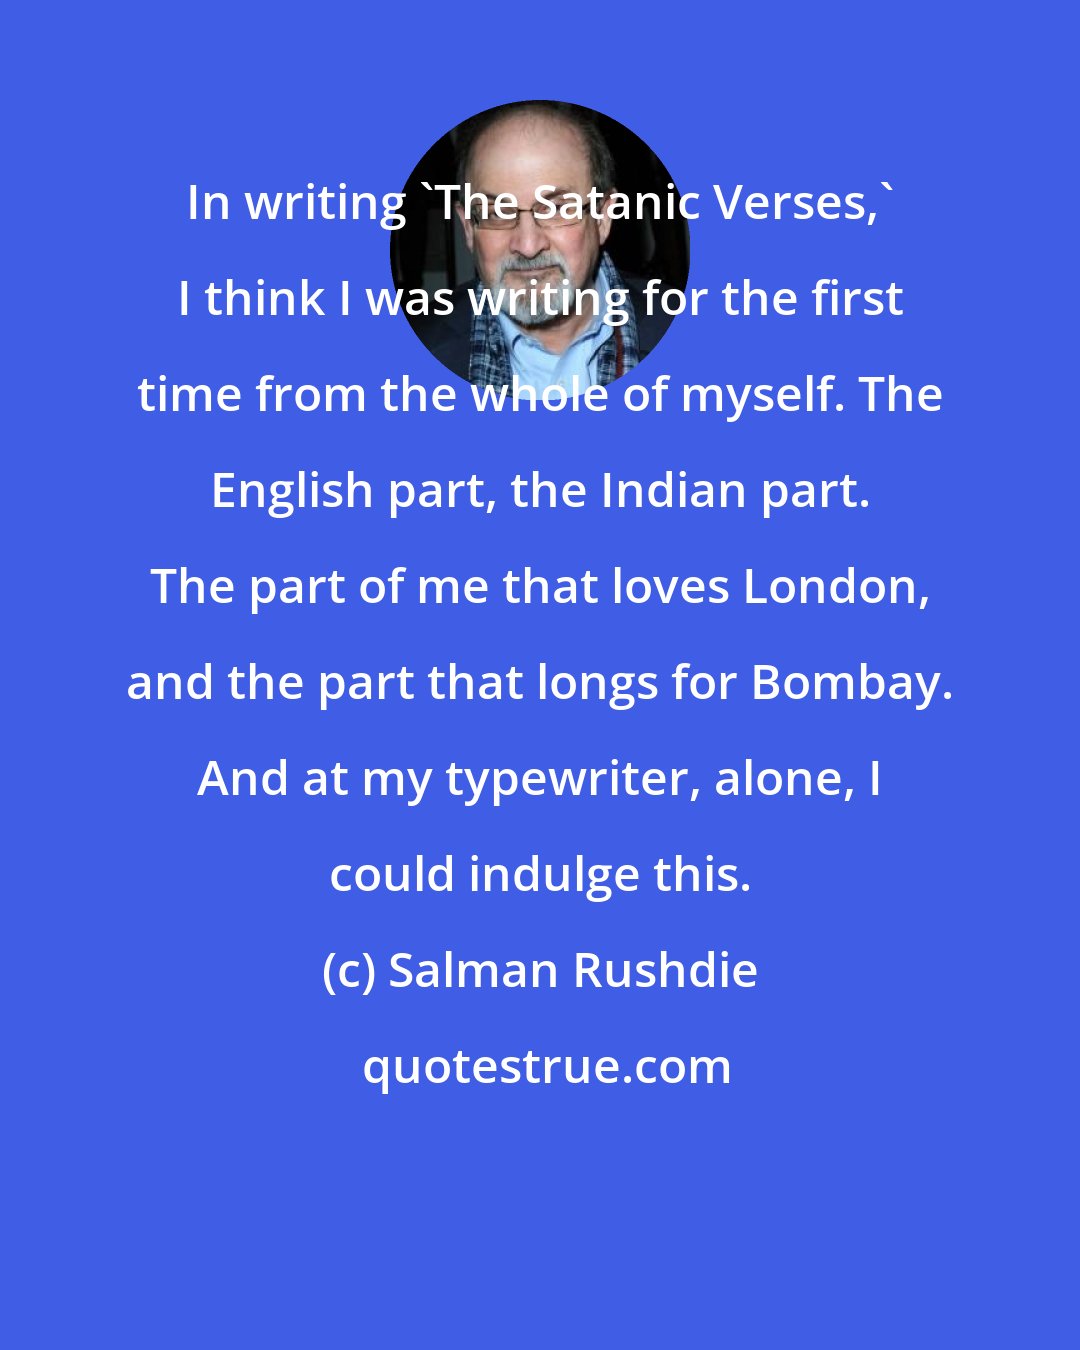 Salman Rushdie: In writing 'The Satanic Verses,' I think I was writing for the first time from the whole of myself. The English part, the Indian part. The part of me that loves London, and the part that longs for Bombay. And at my typewriter, alone, I could indulge this.